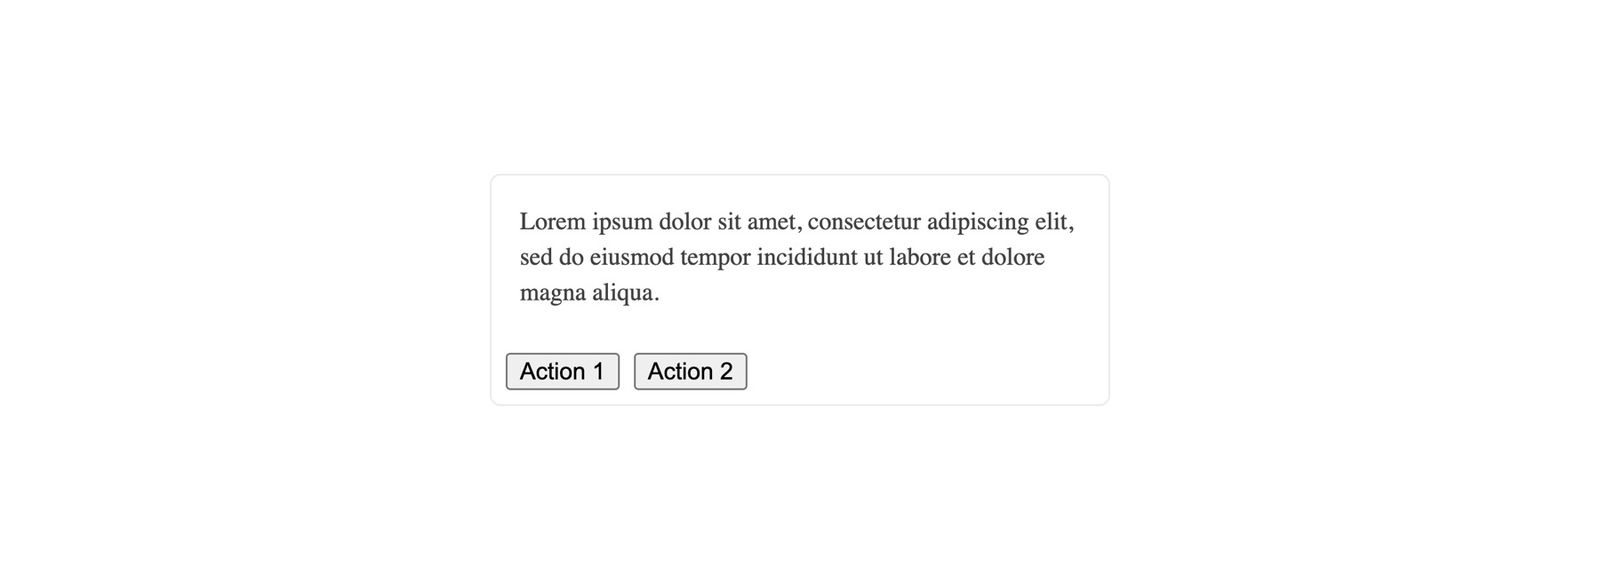 Card has a block of Lorem ipsum text and two buttons below, sitting side by side on the left, labeled Action 1 and Action 2